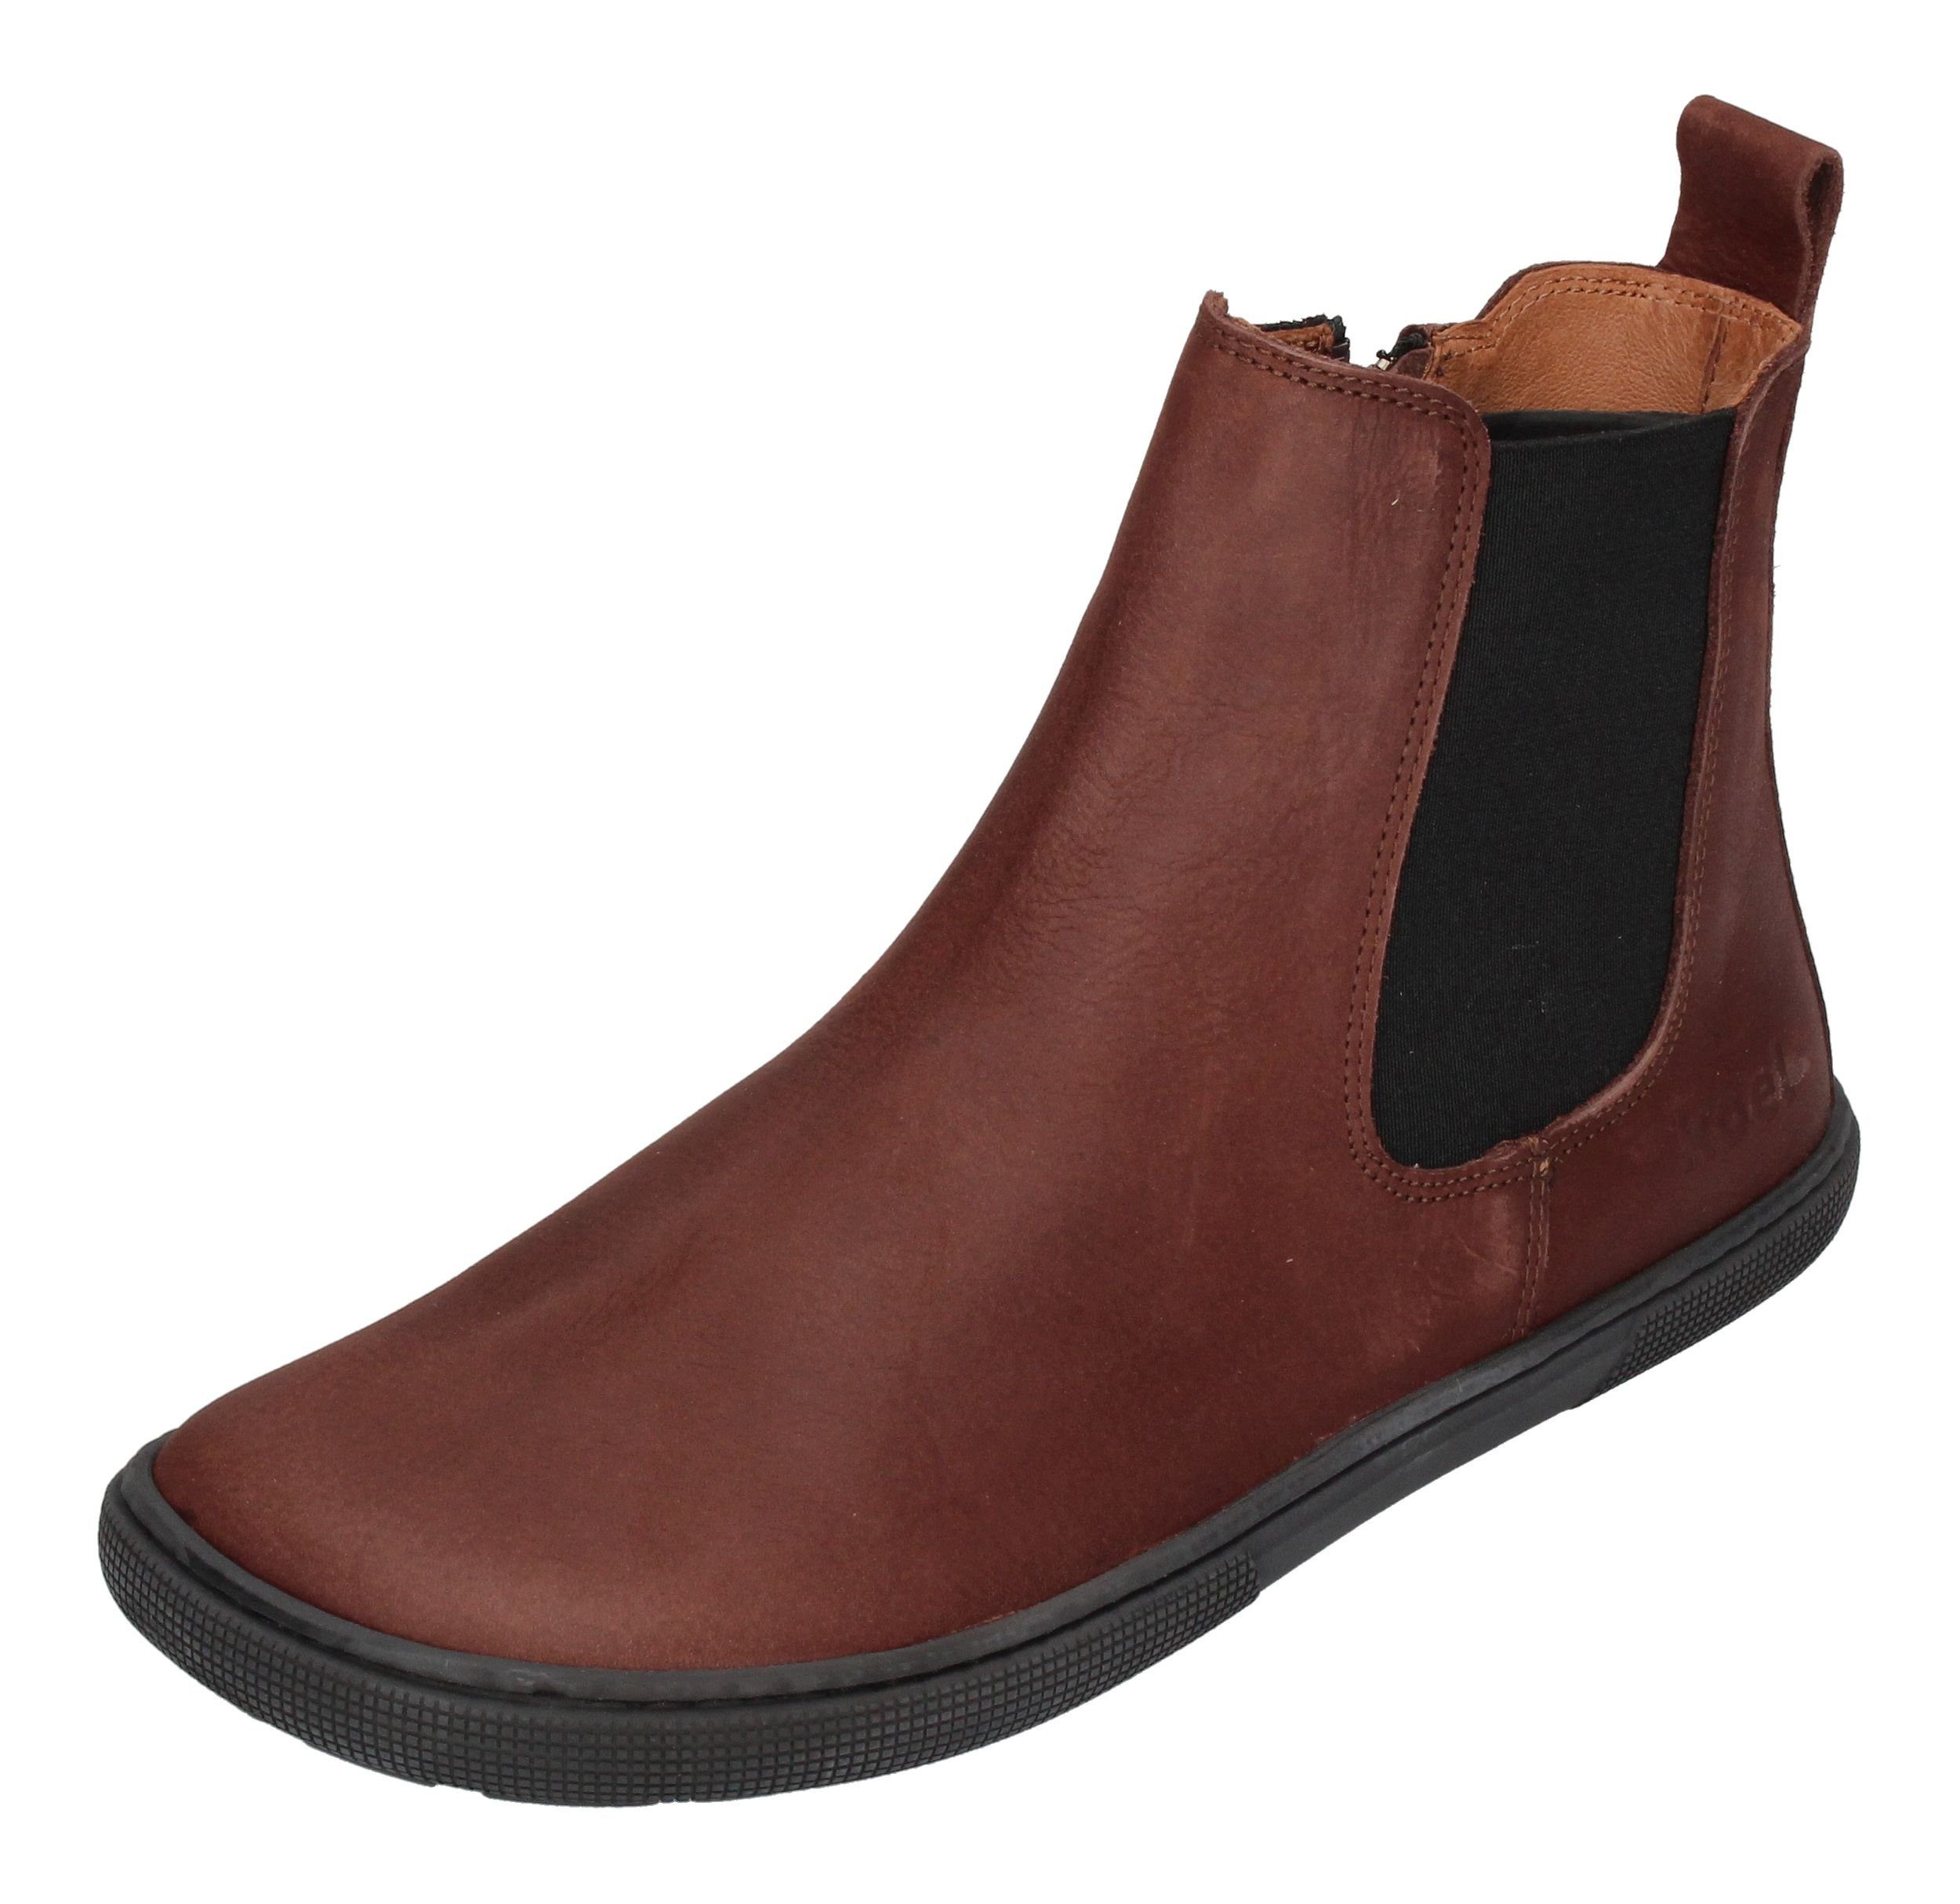 Hydro Chocolate 08L009.231-510 Chelseaboots KOEL Filas